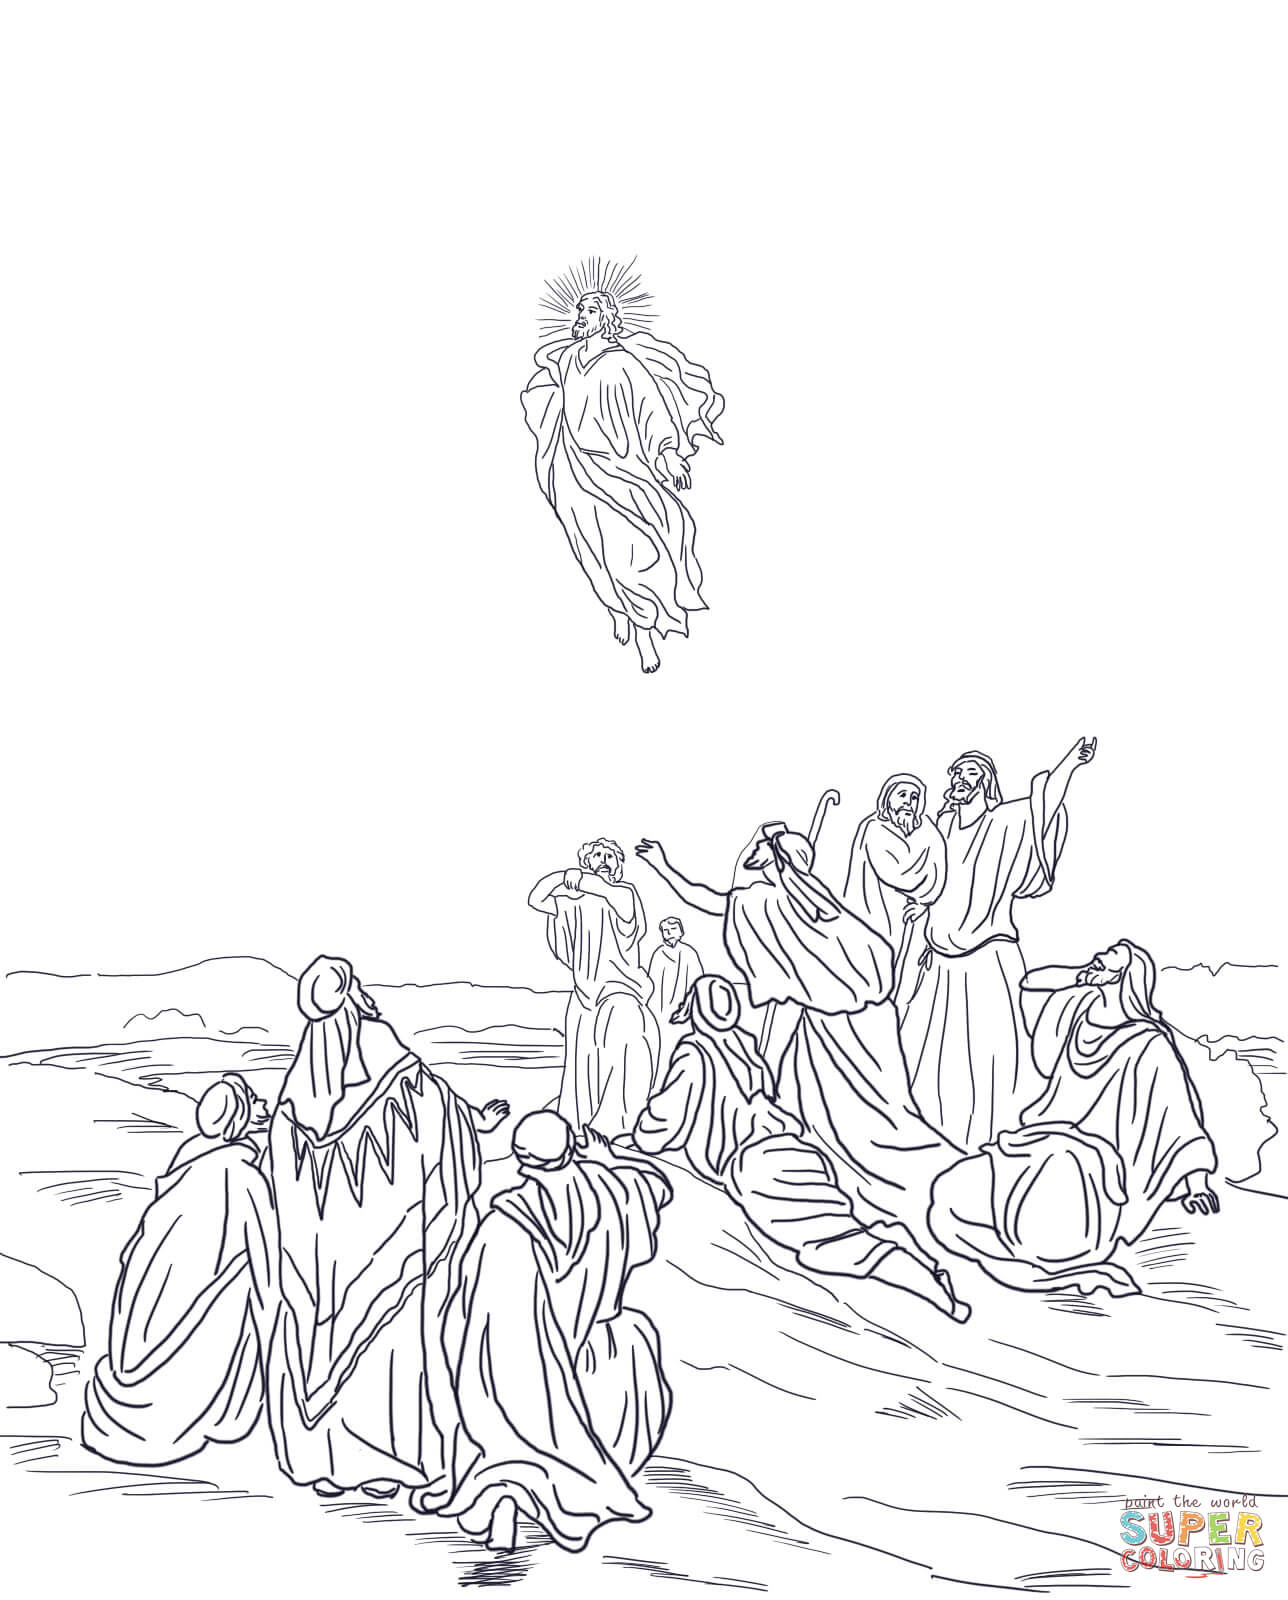 Jesus Ascension Into Heaven coloring page | Free Printable ...